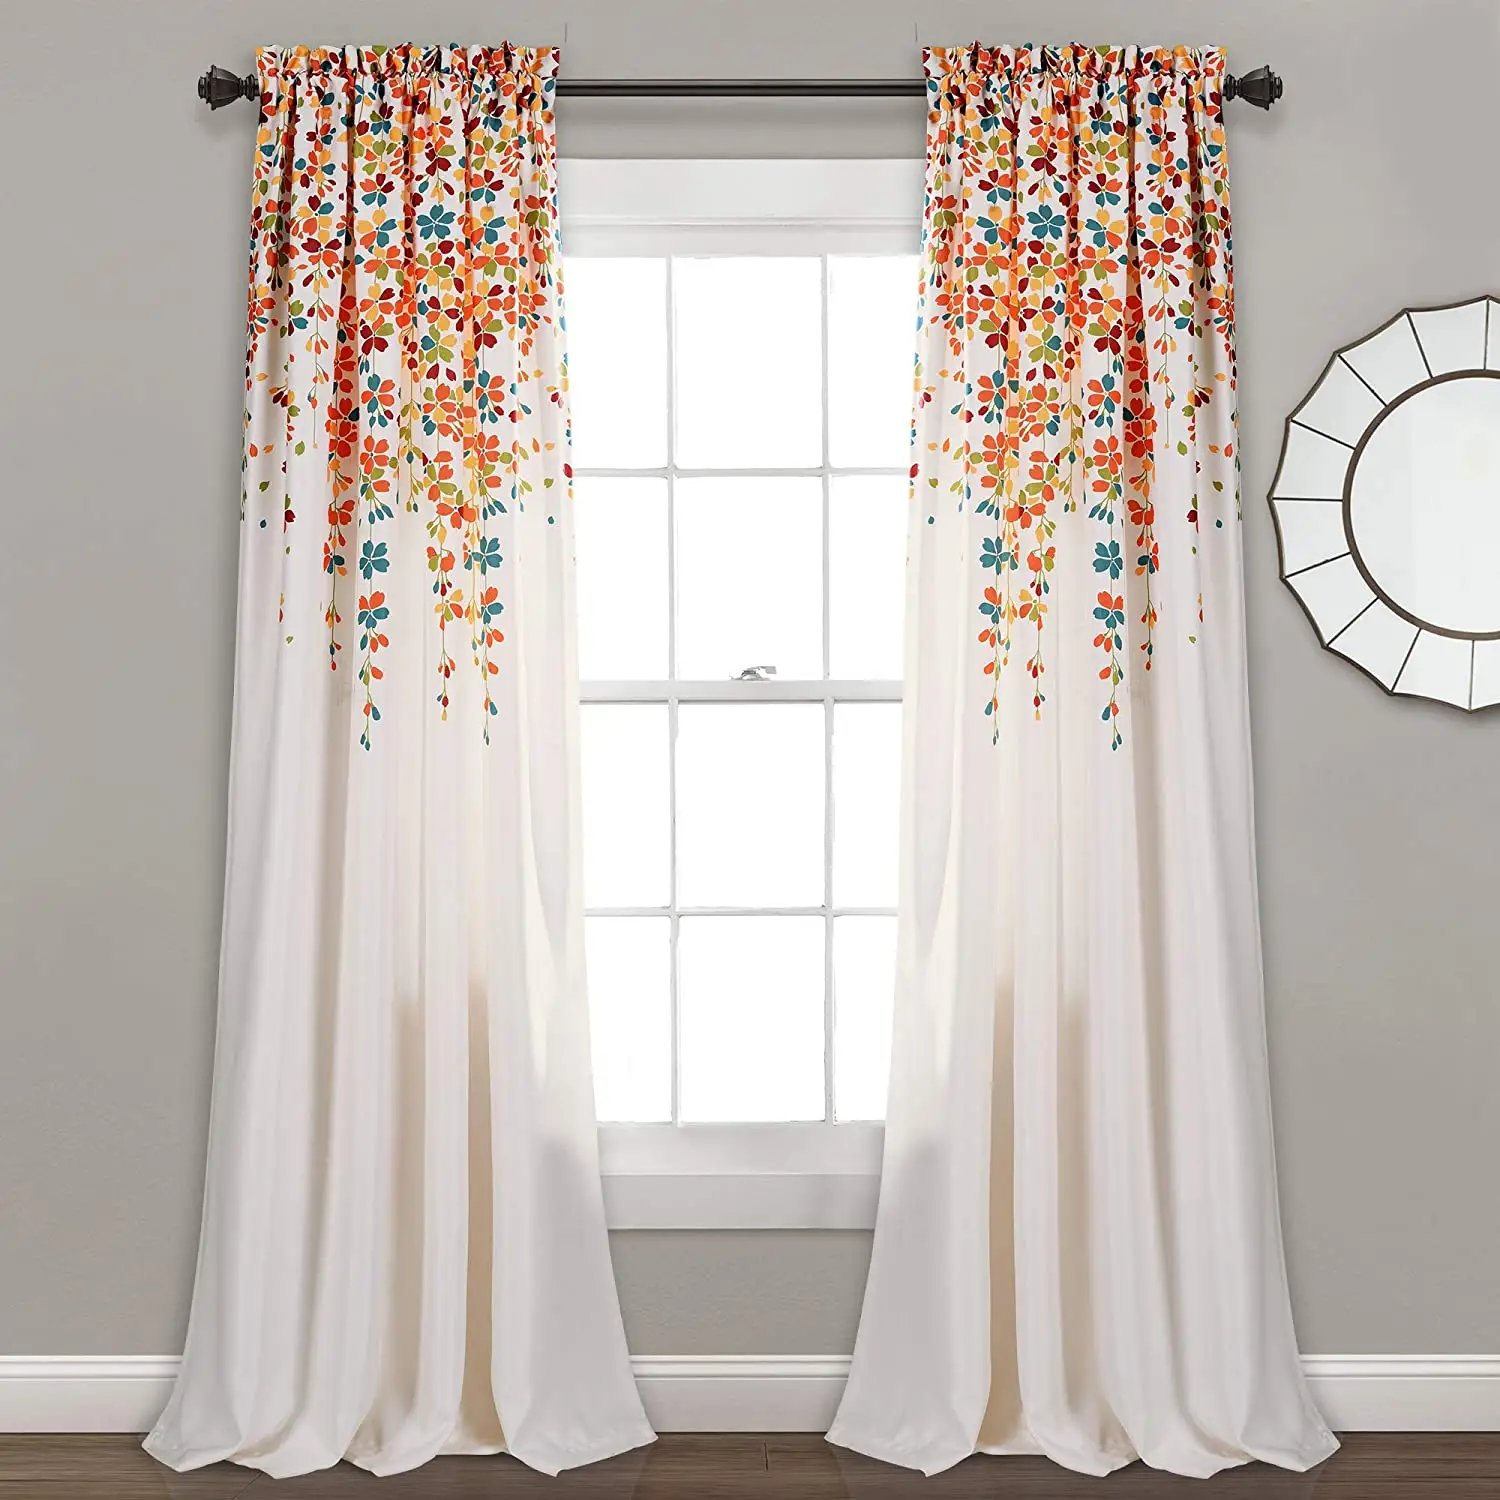 High quality modern printed curtain with floral design